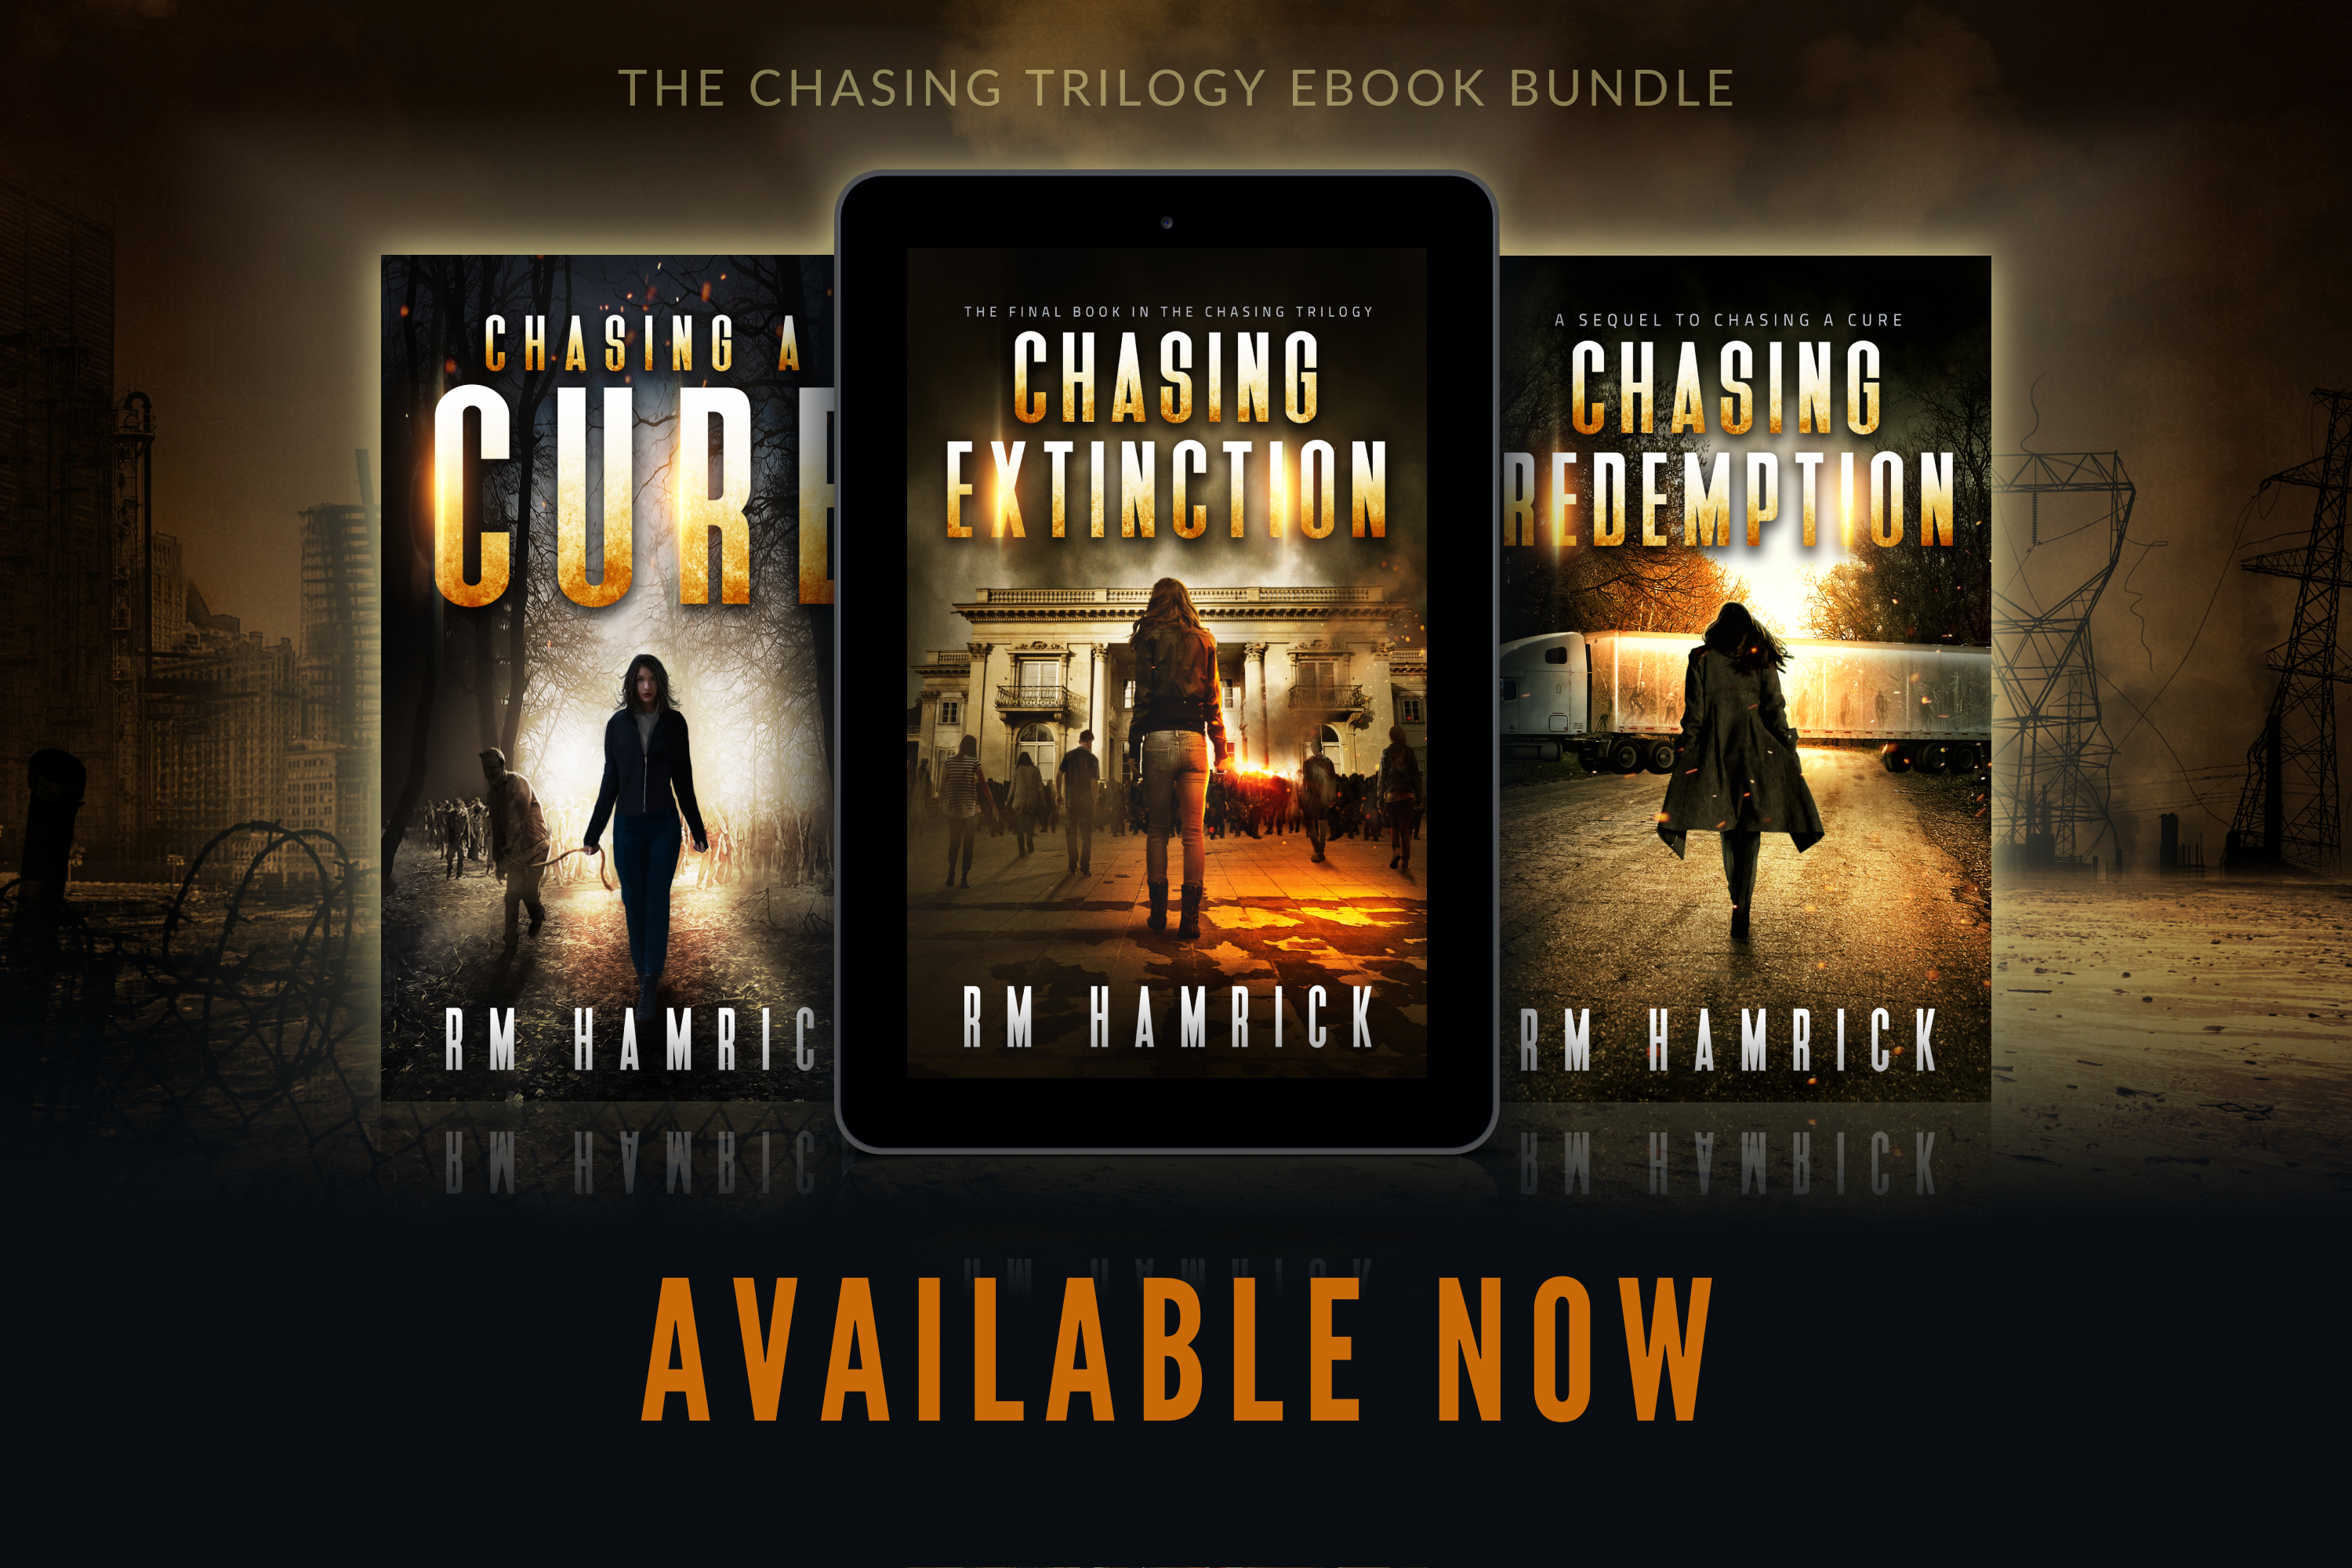 Three Chasing book covers, one inside ipad set in front of a ruined city background. "The Chasing Trilogy ebook bundle Available now"